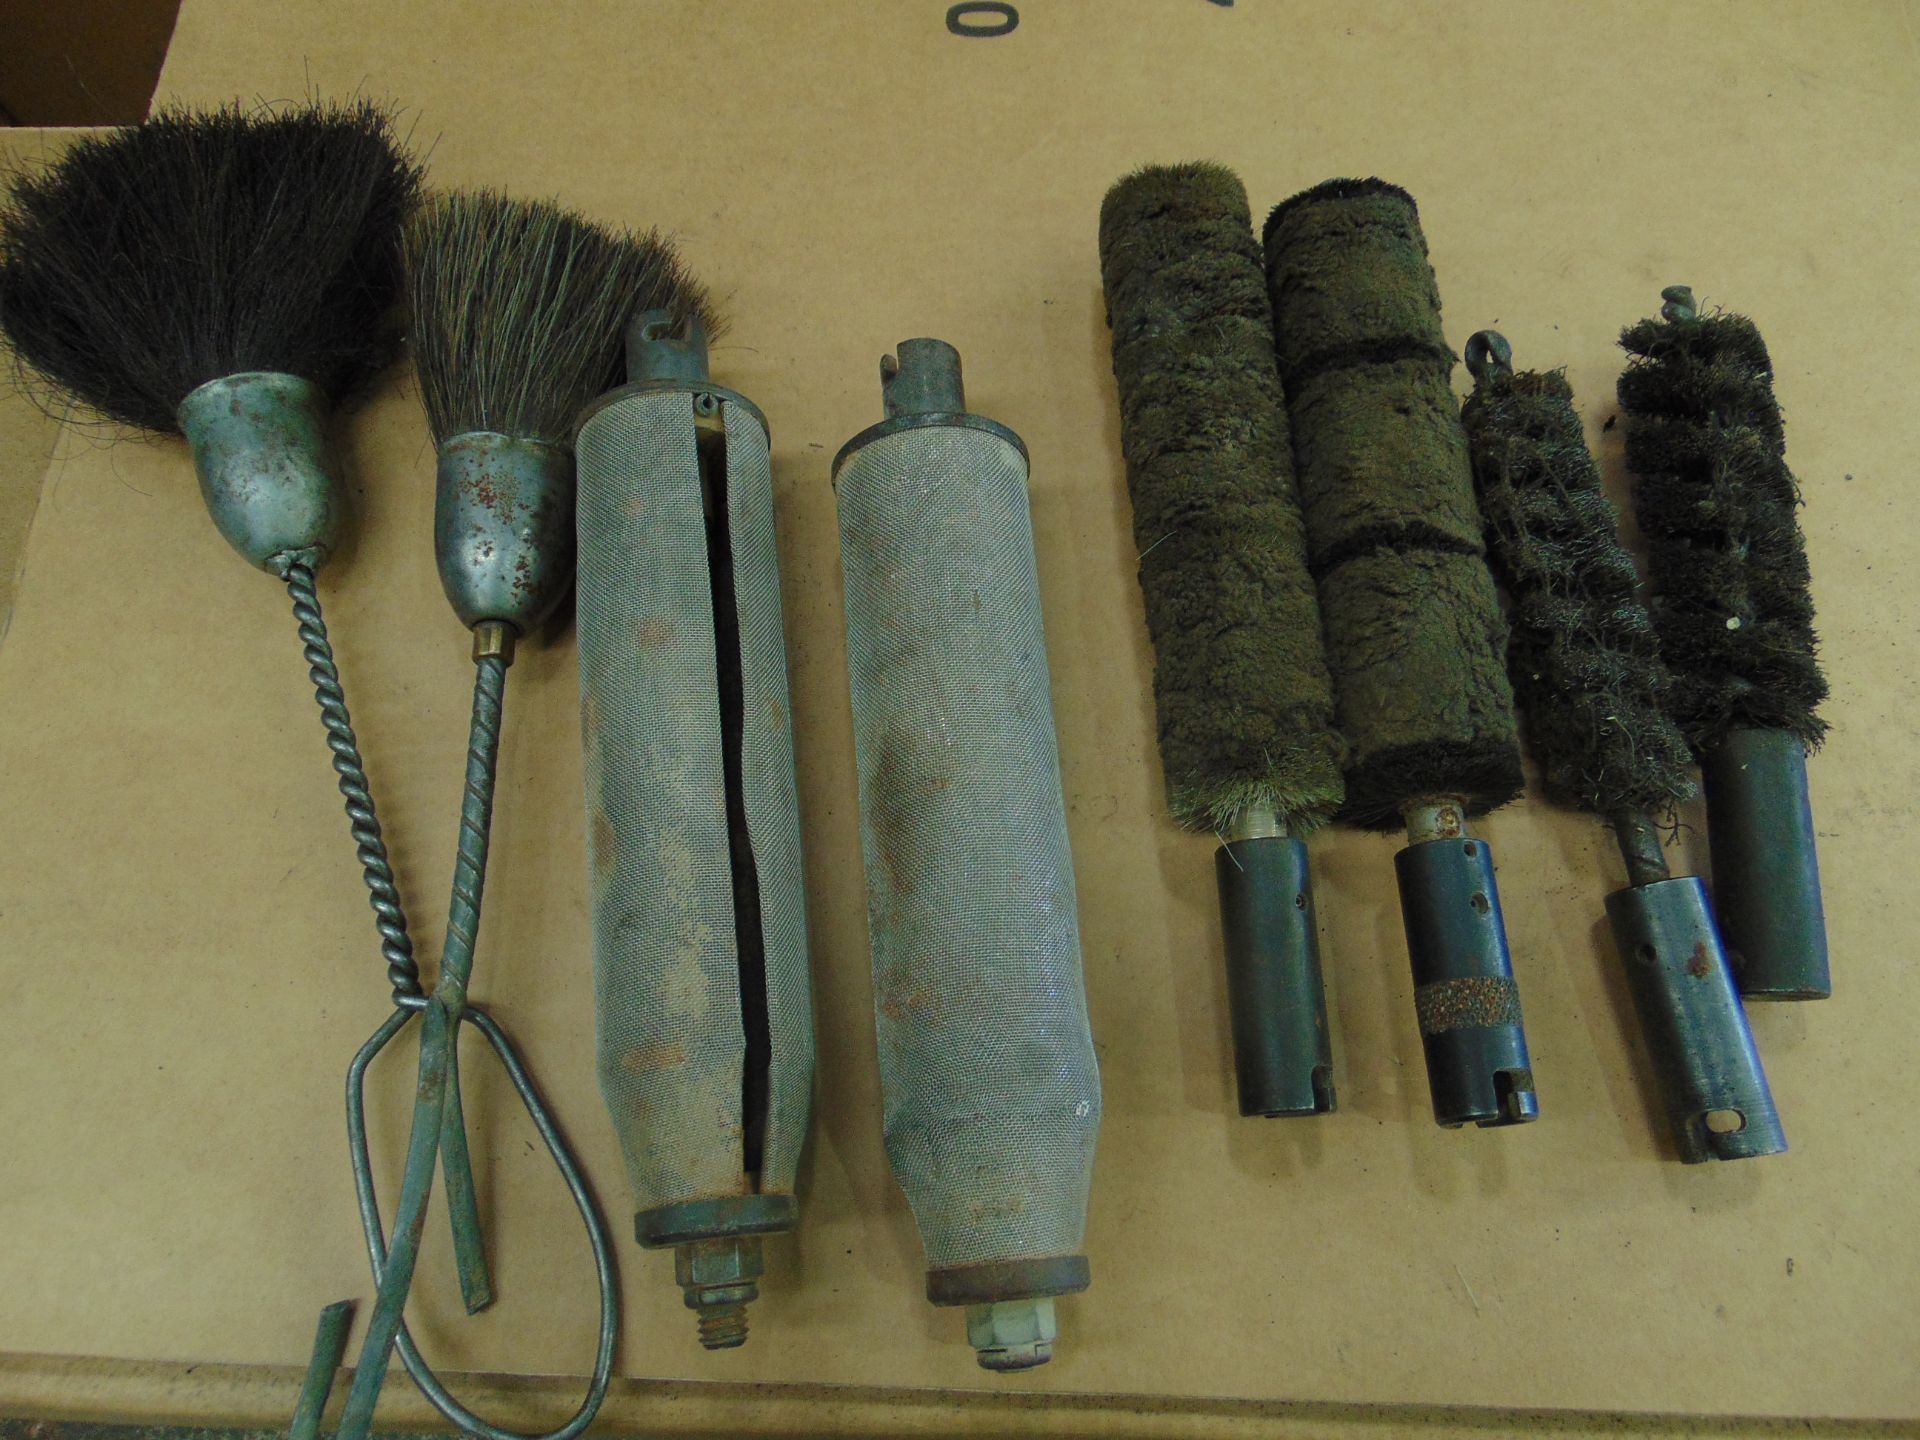 30mm RARDEN CANNON CLEANING KIT ITEMS